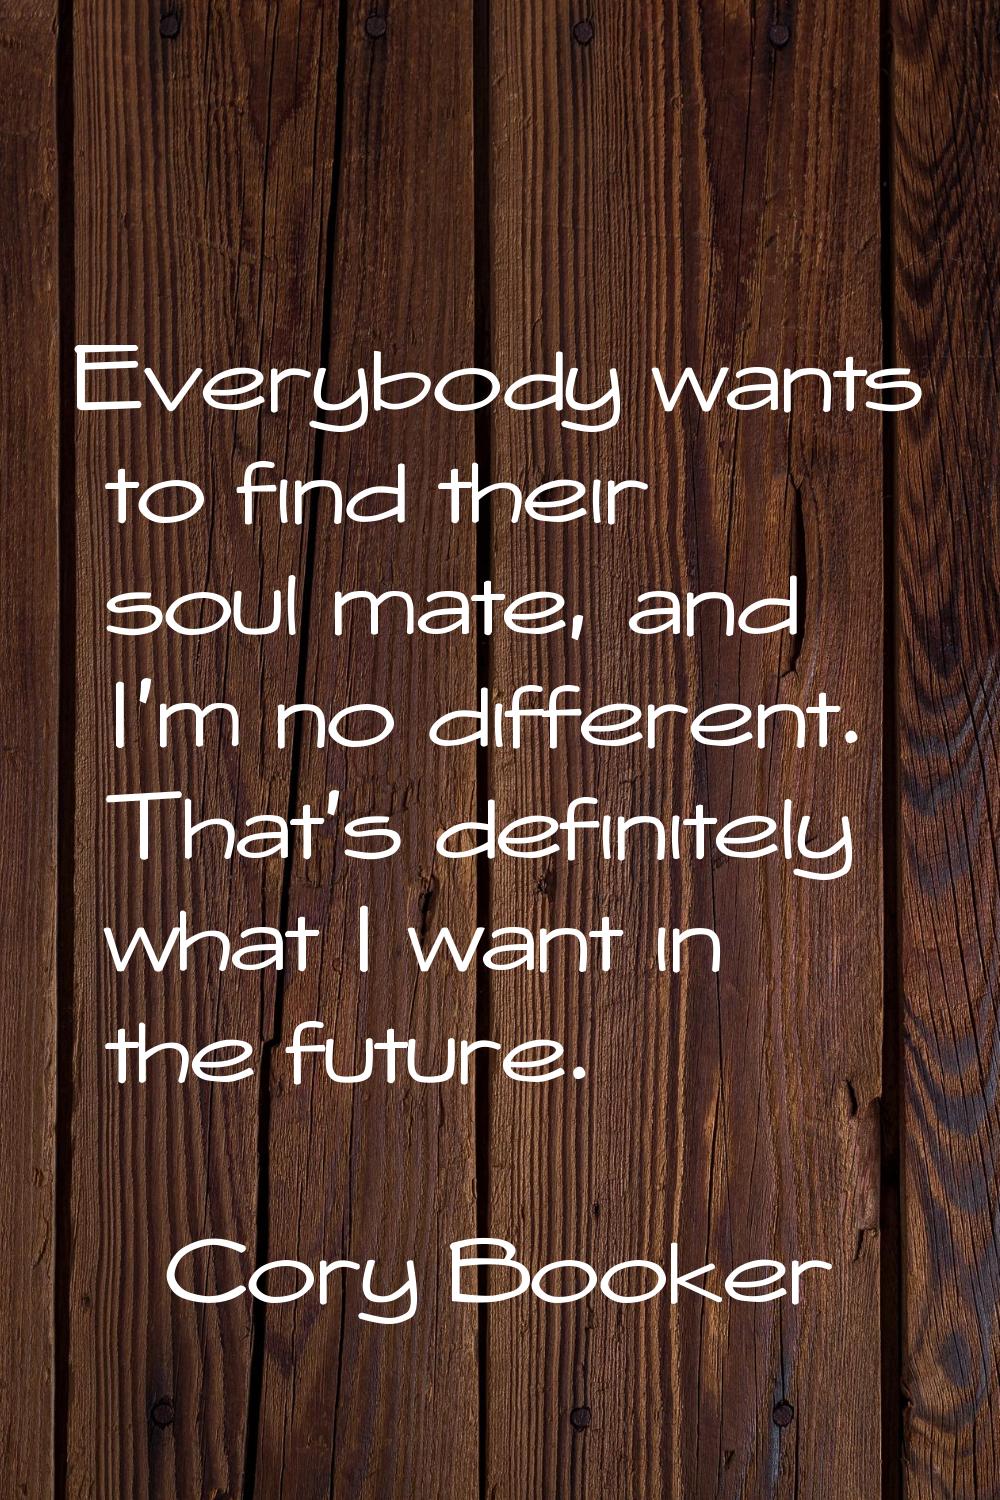 Everybody wants to find their soul mate, and I'm no different. That's definitely what I want in the